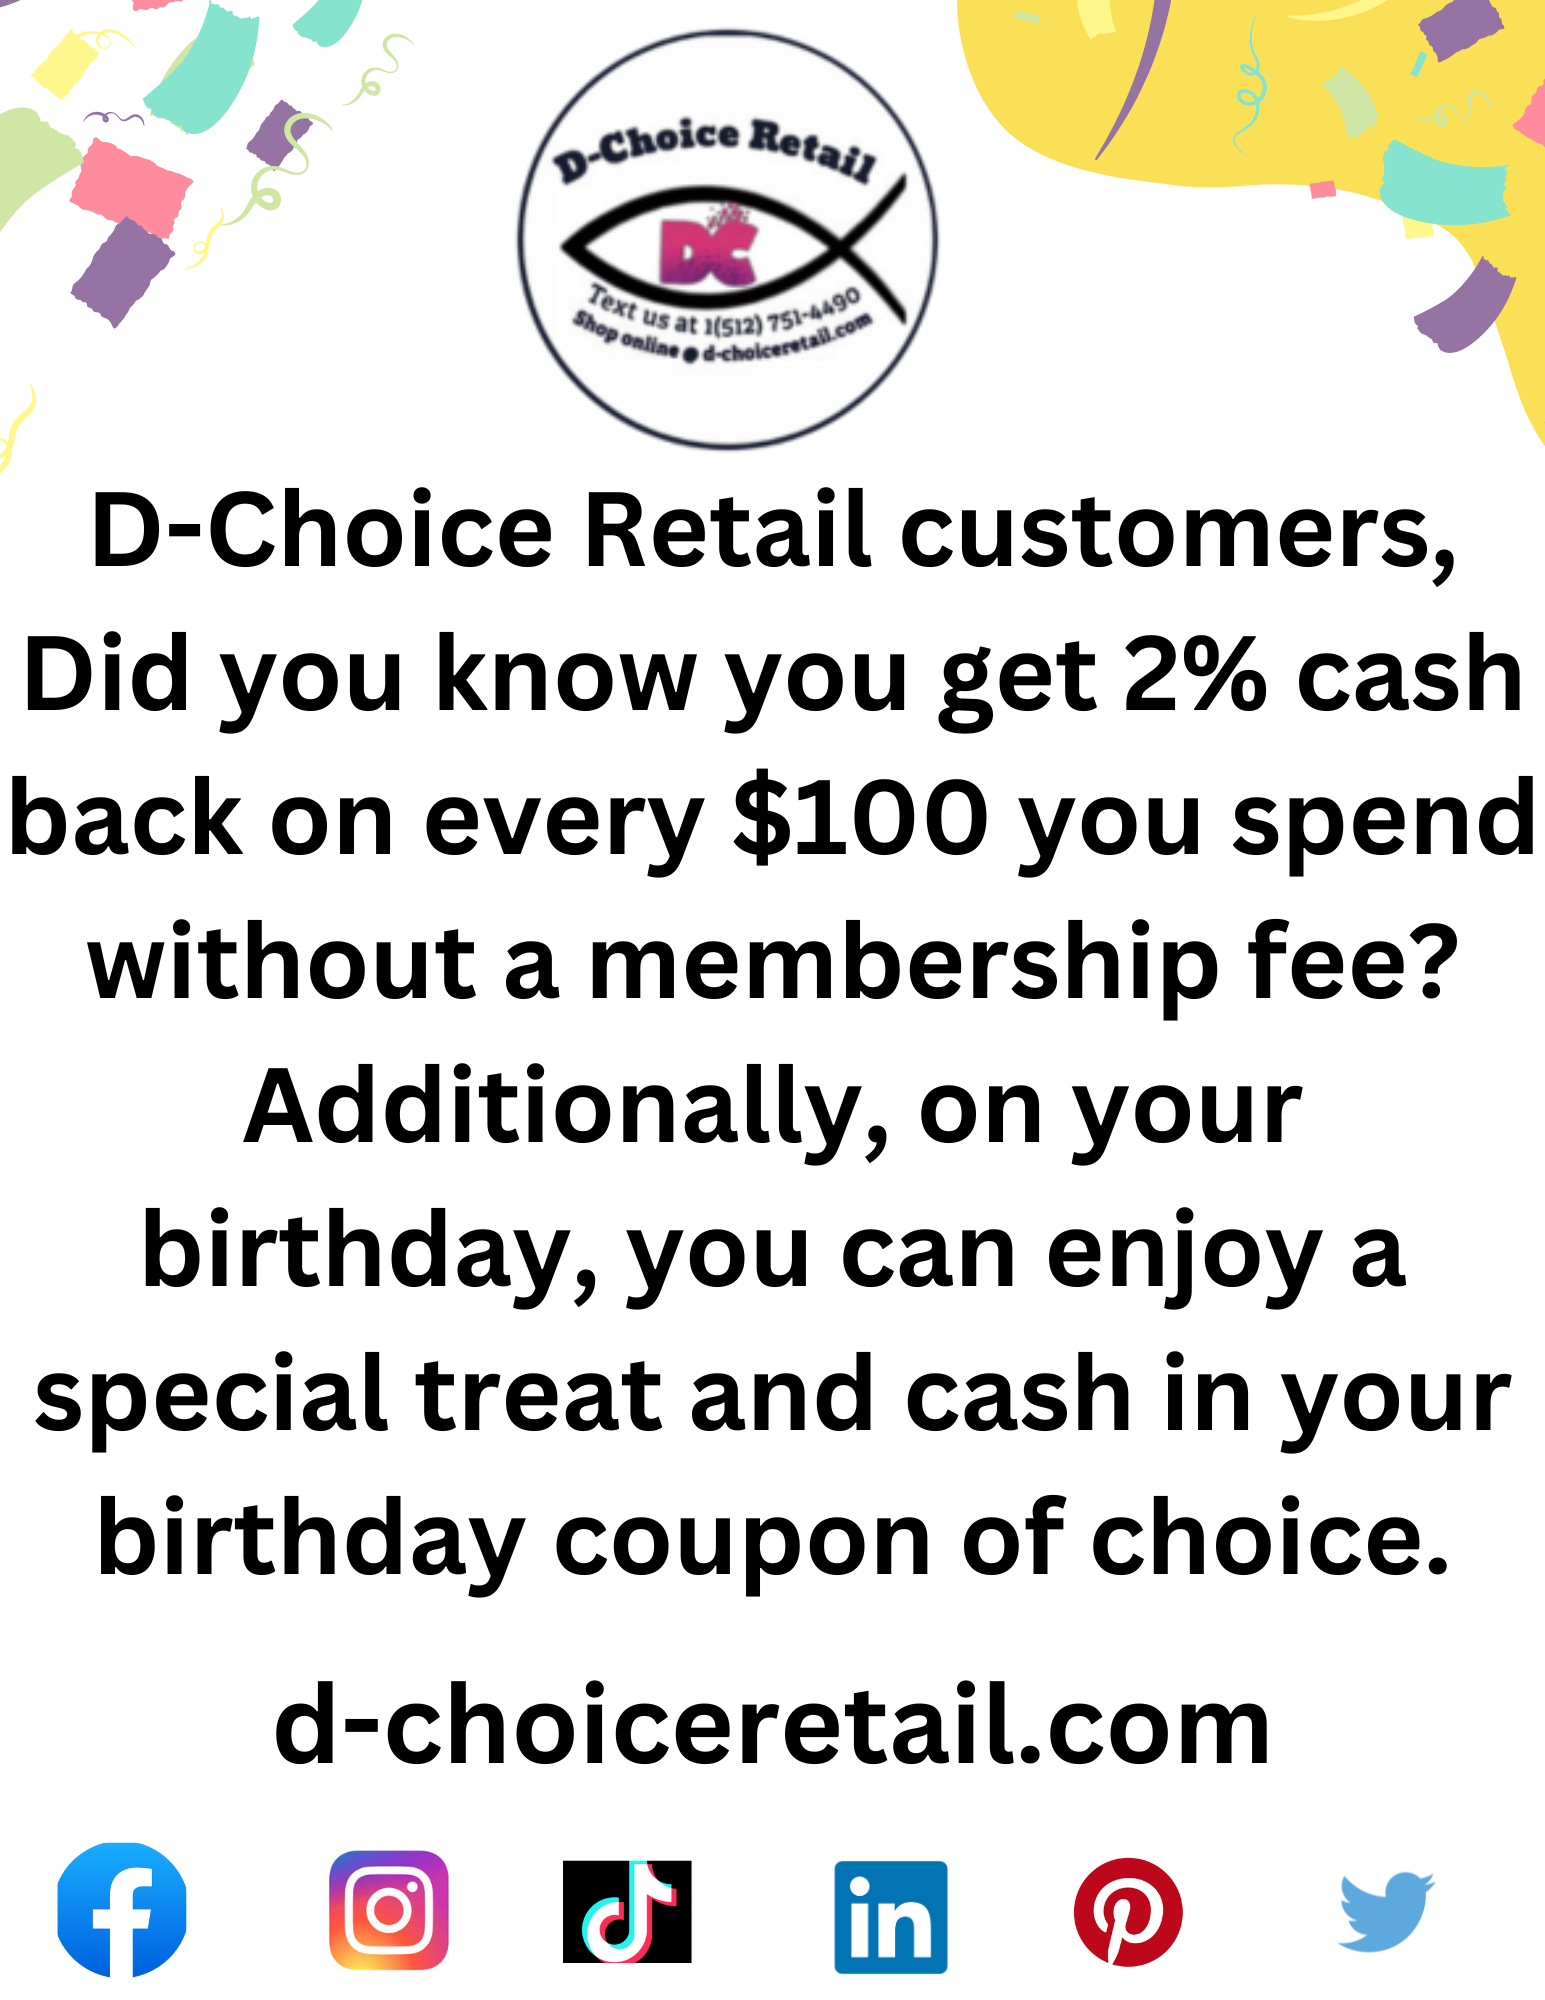 d-choice-retail-customers-did-you-know-that-you-get-2-back-on-every-100-you-spend-without-a-membership-fee-additionally-on-your-birthday-you-can-enjoy-a-special-treat-and-cash-in-your-birthda-2-.png